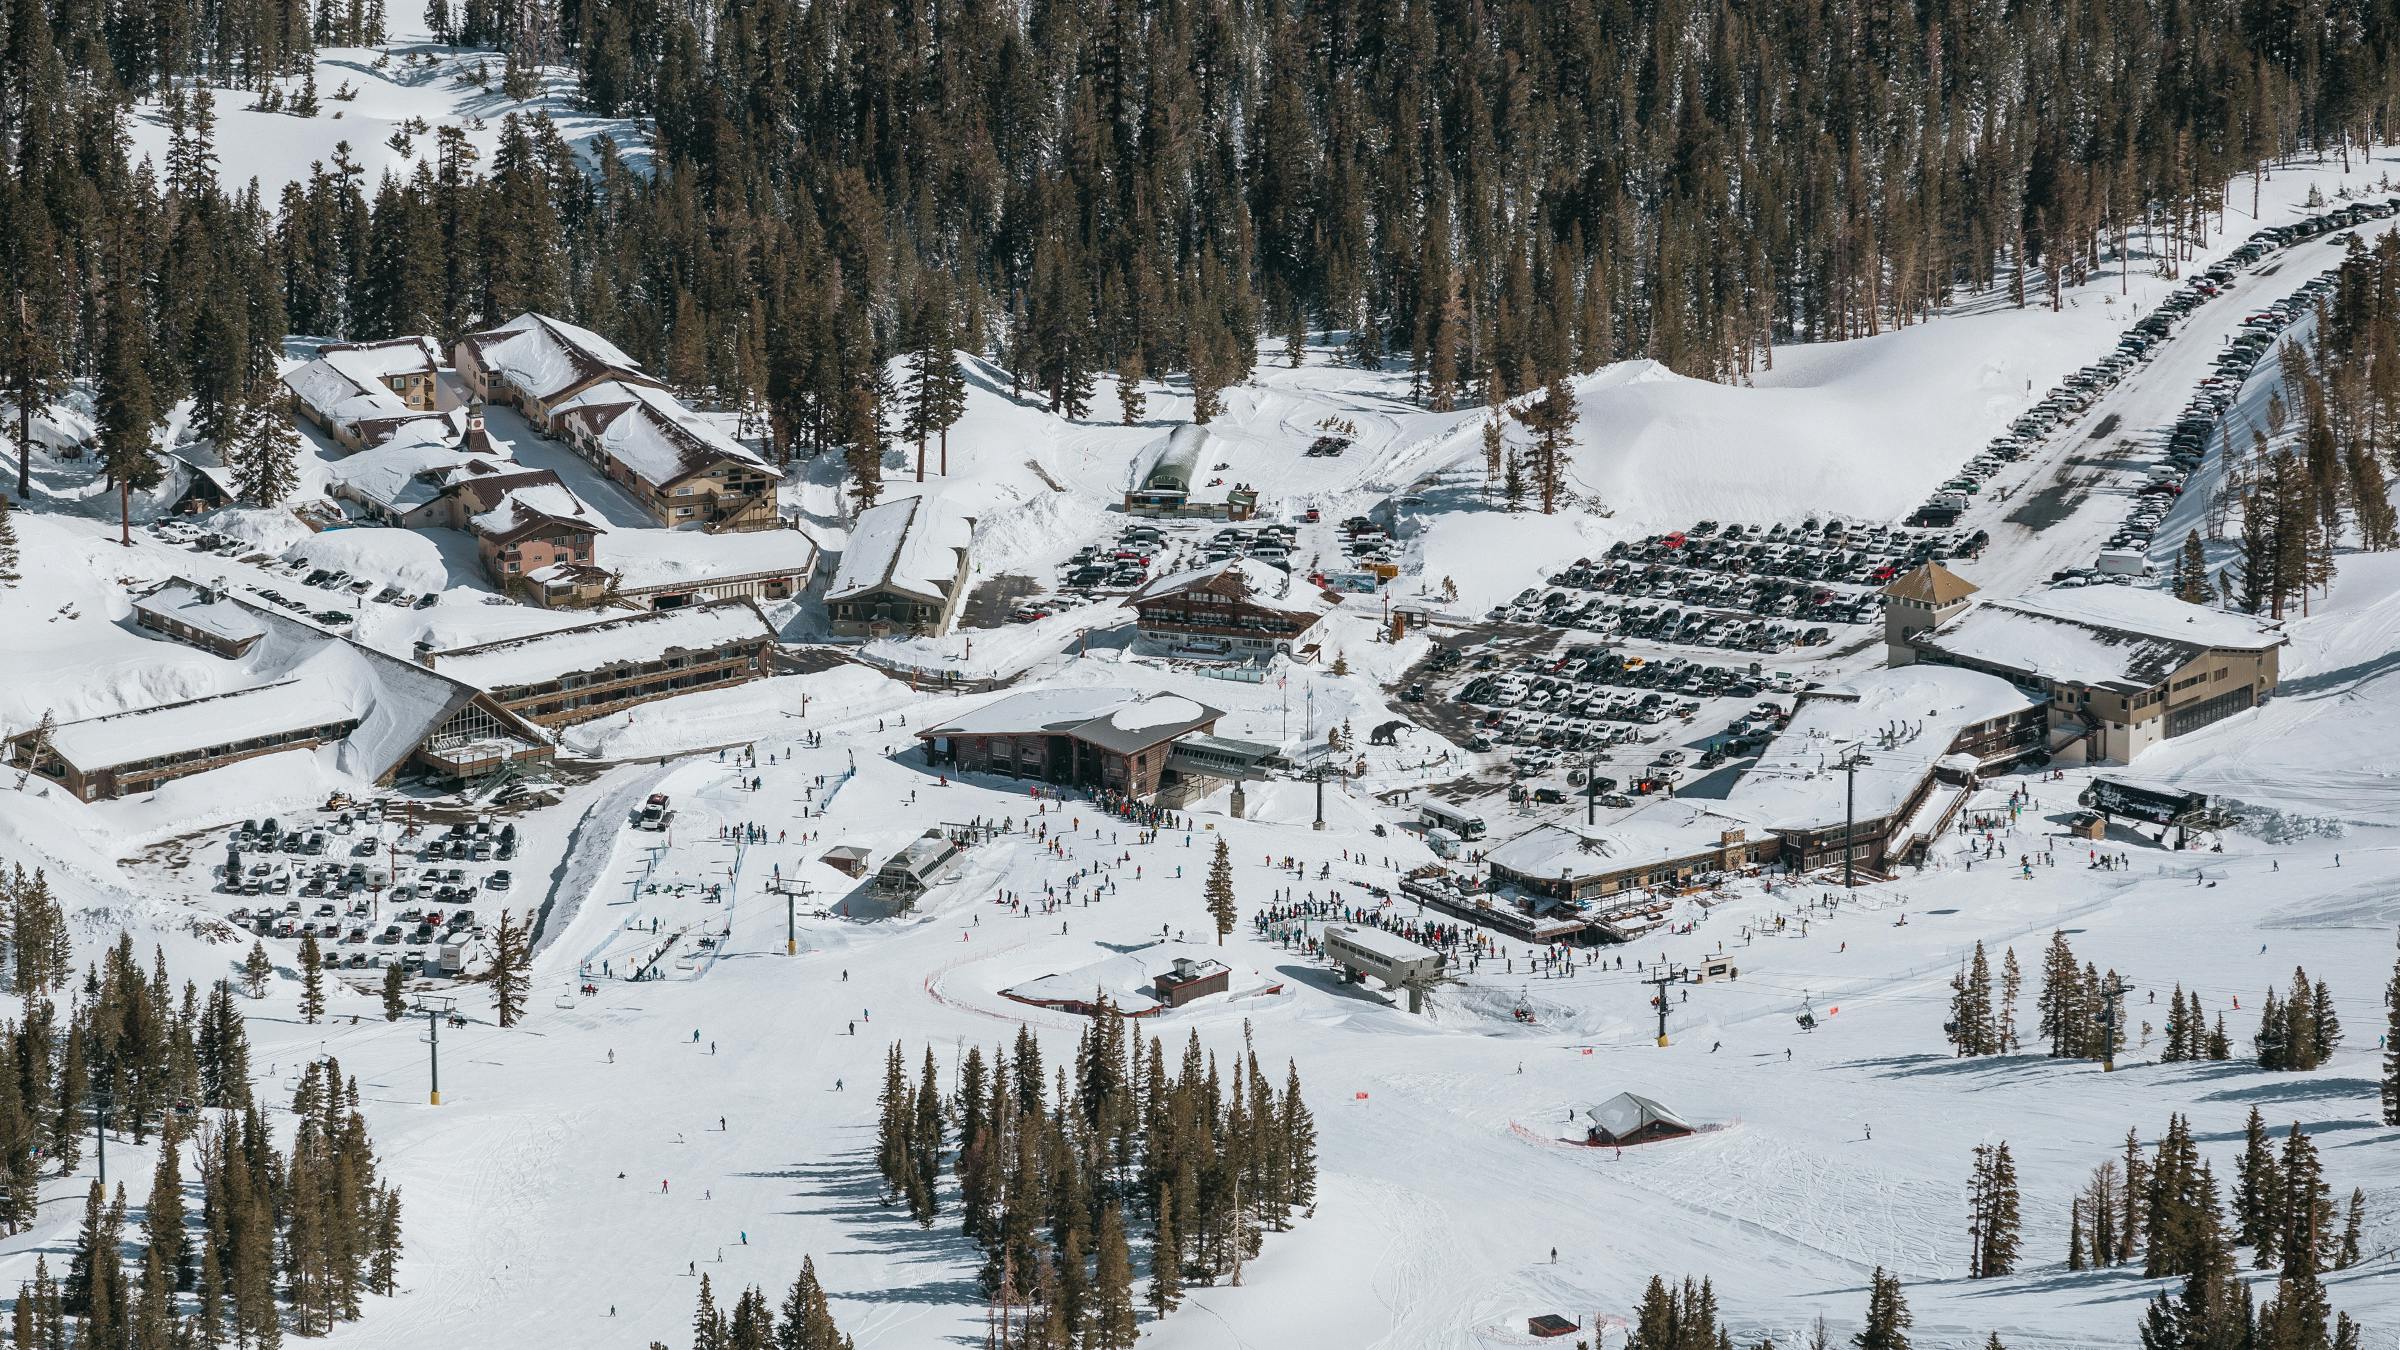 Aerial image of Main Lodge and Mammoth Mountain Inn